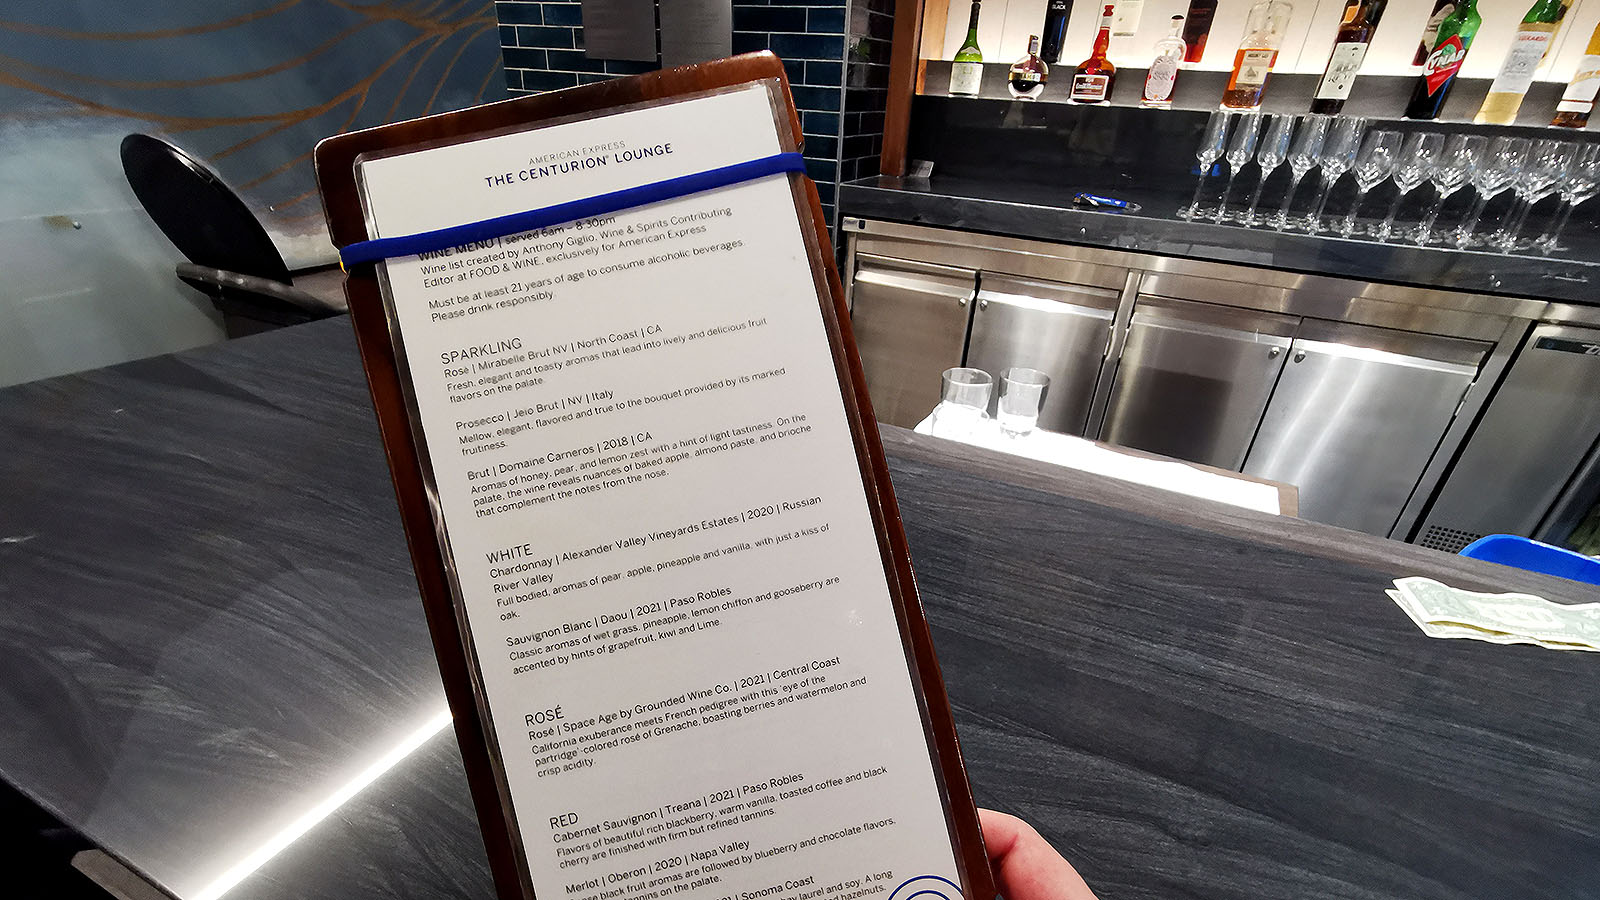 Drinks menu in the Amex Centurion Lounge in San Francisco